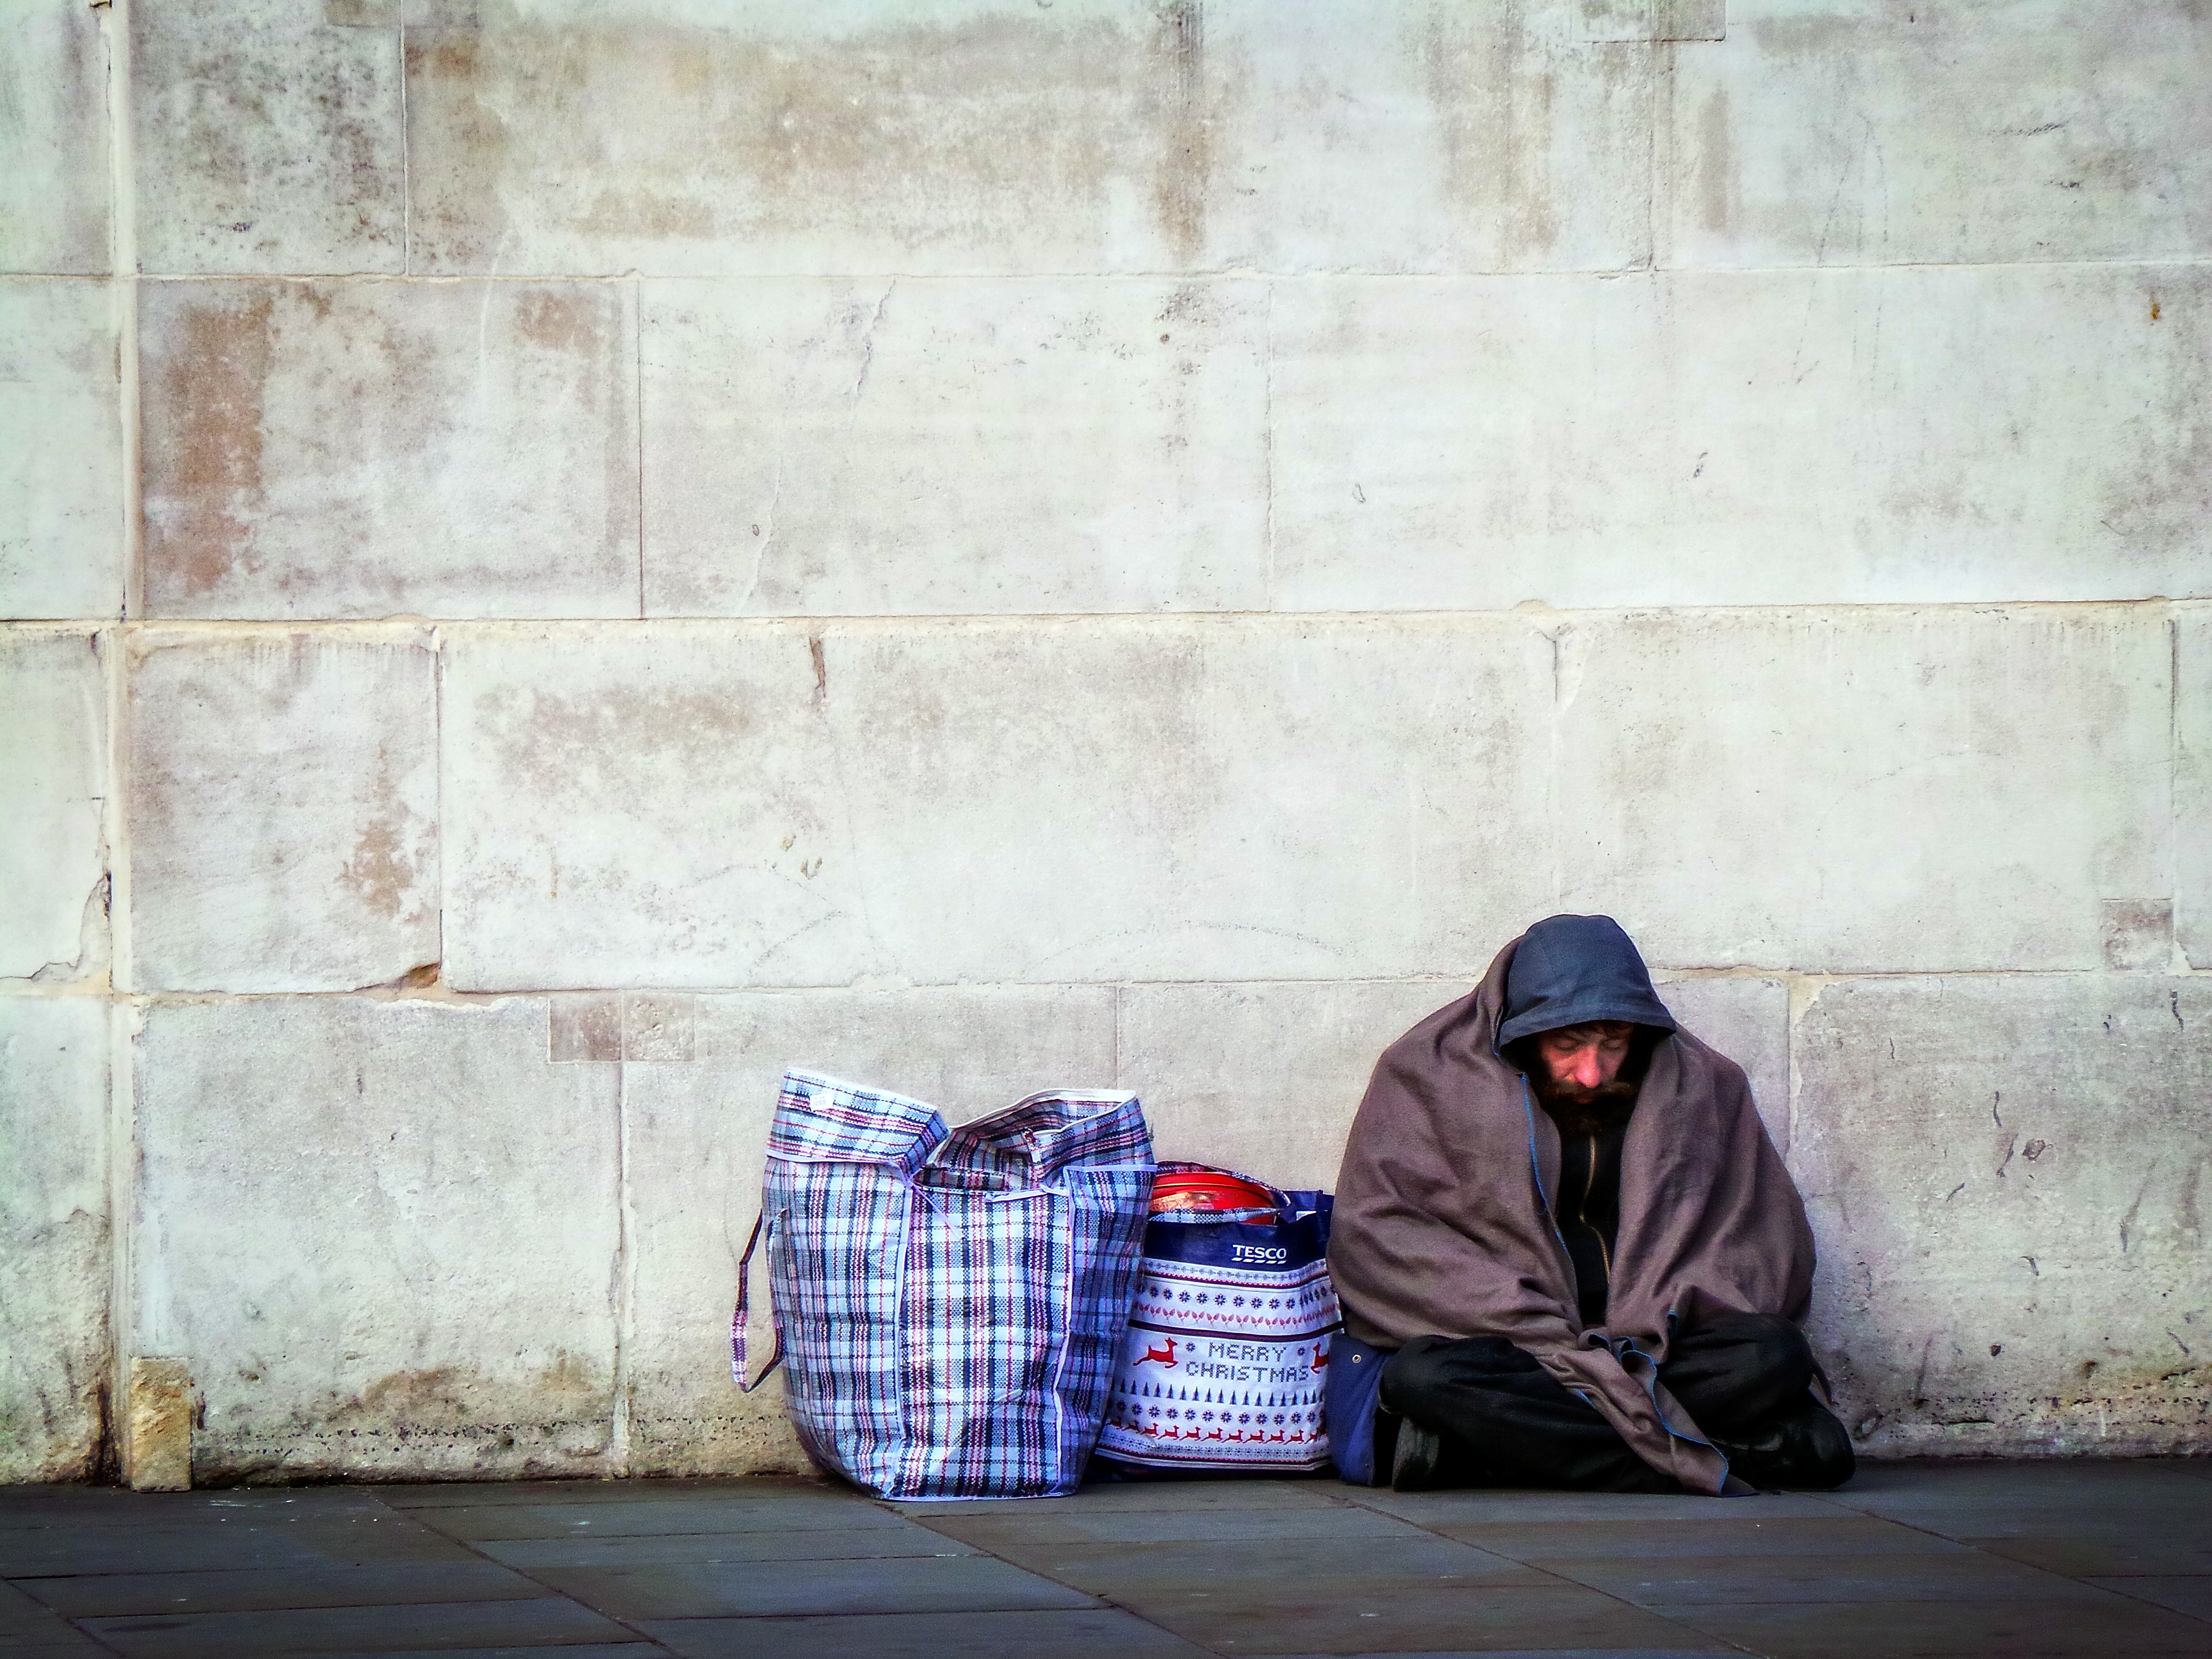 Homeless people could avoid life-saving services, if there’s a risk of deportation